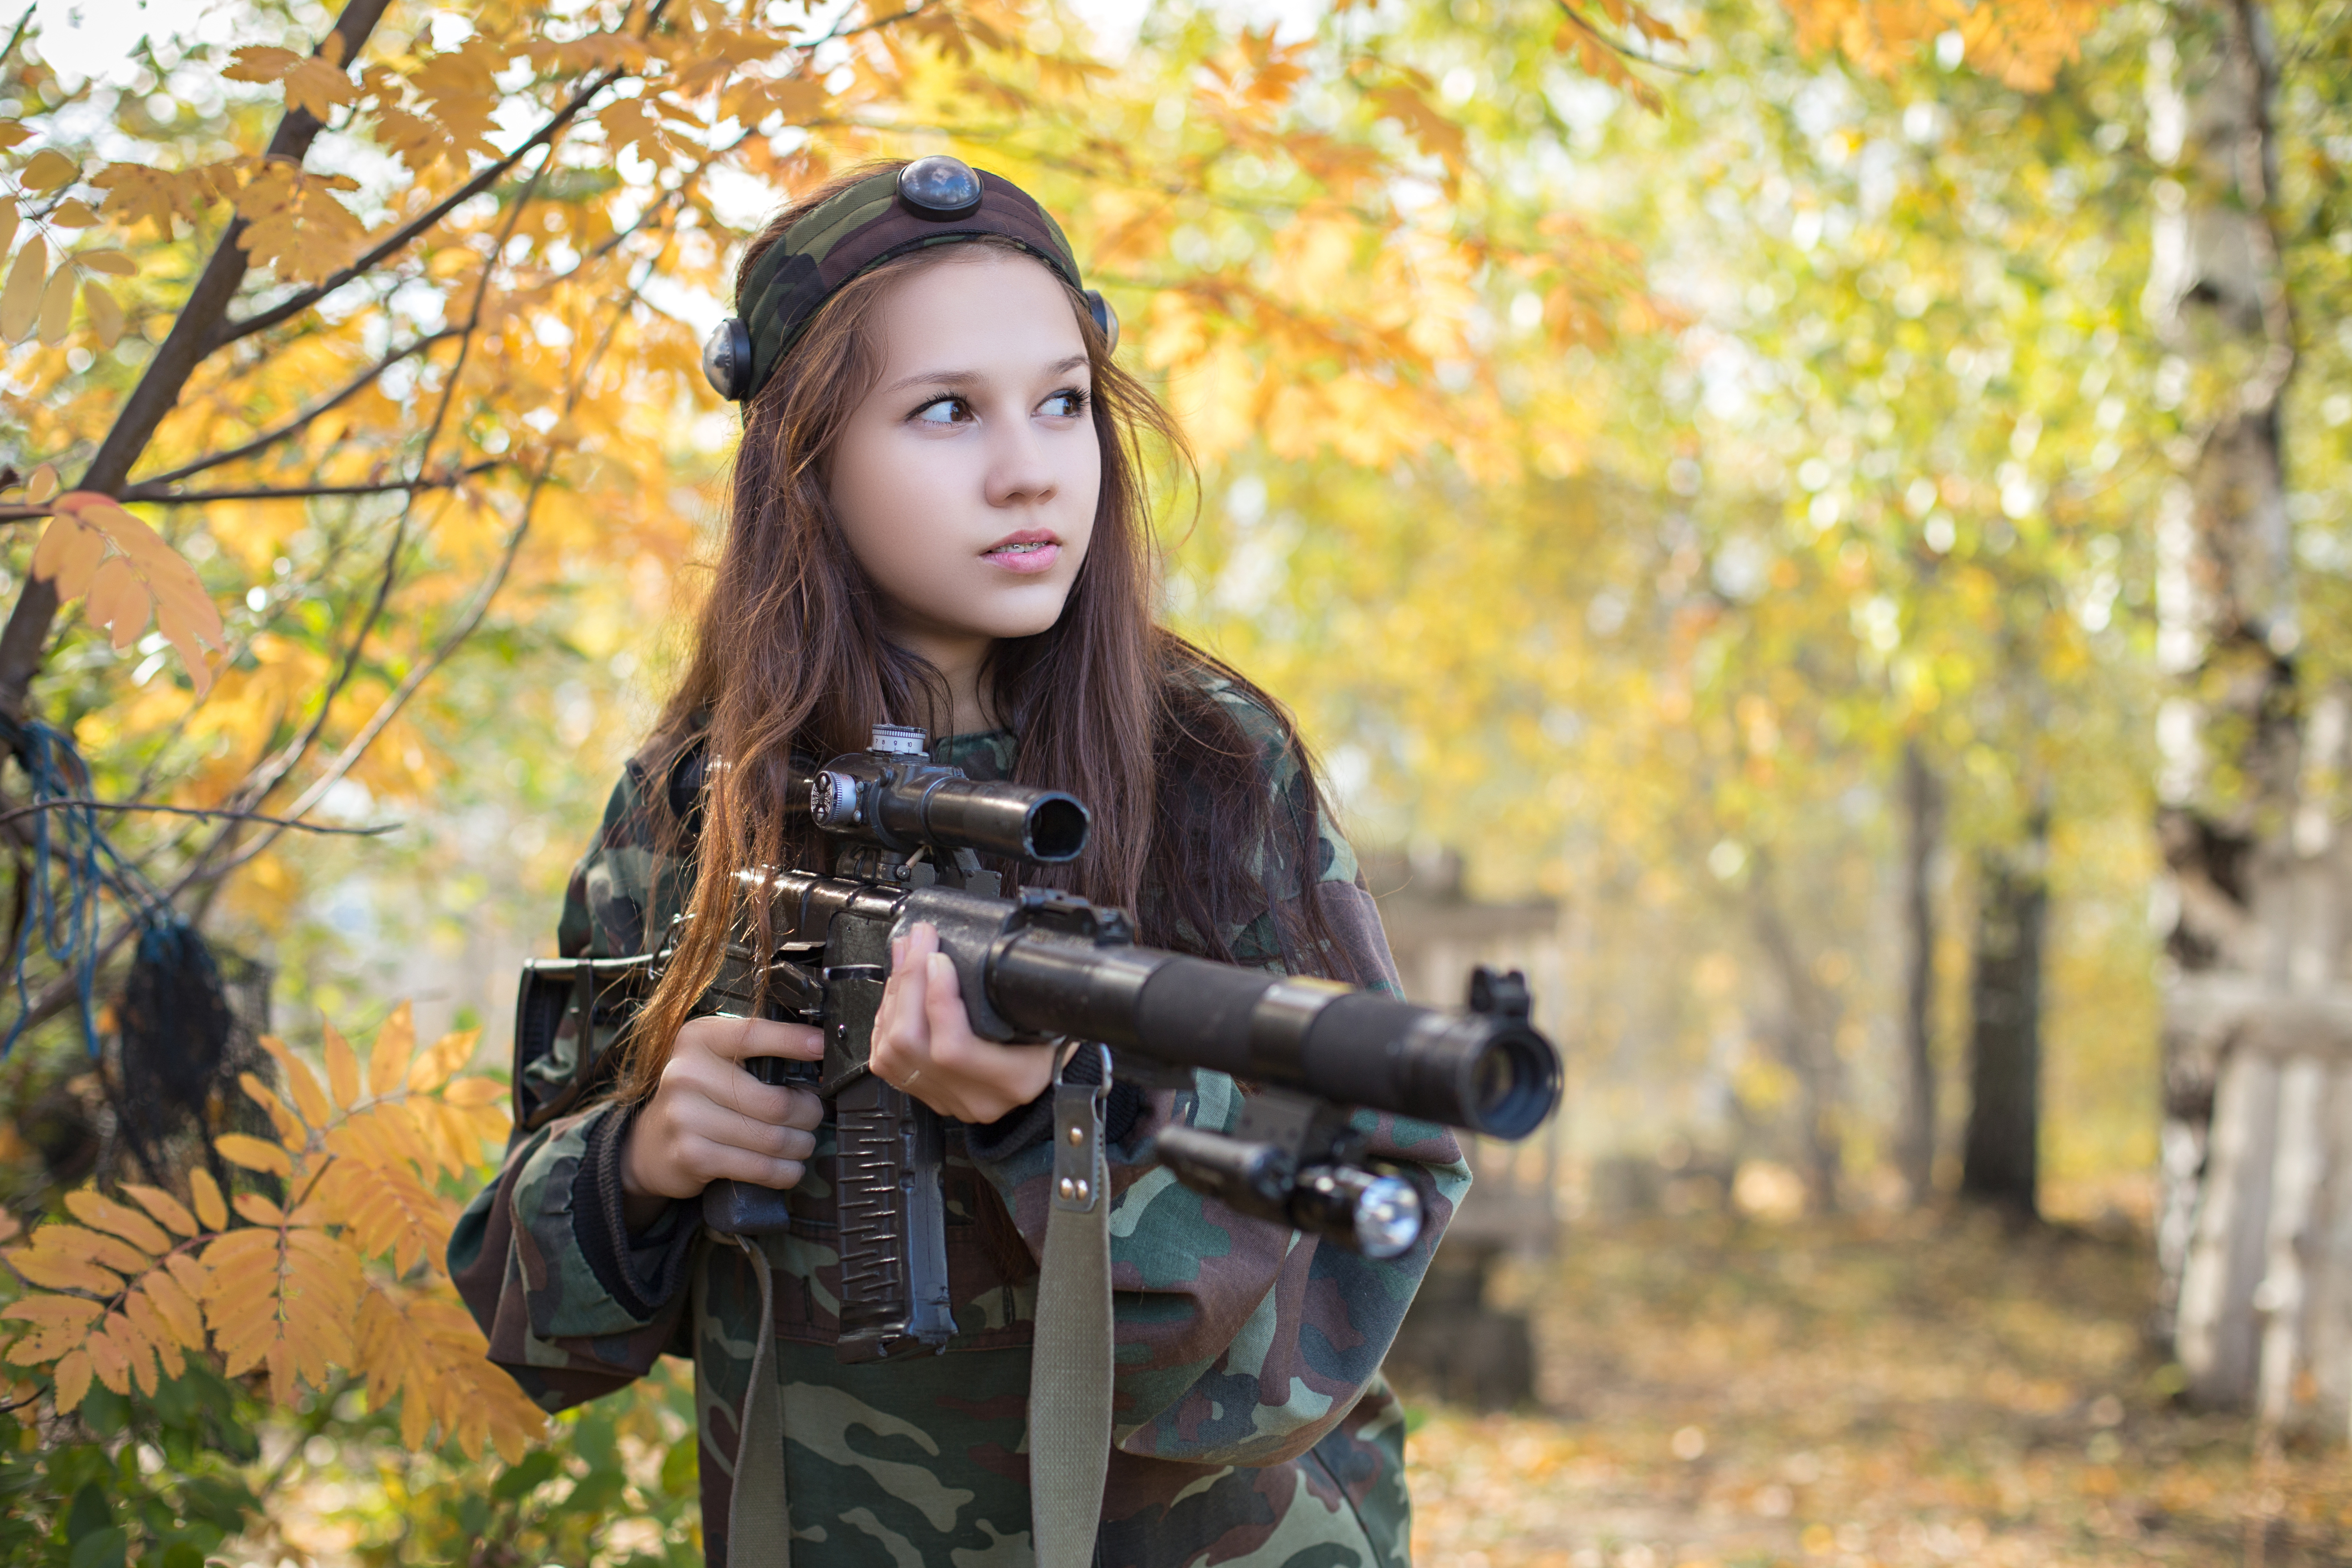 Girls With Guns Model Alexey Kokorin Laser Tag Fall Yellow Leaves 5254x3503